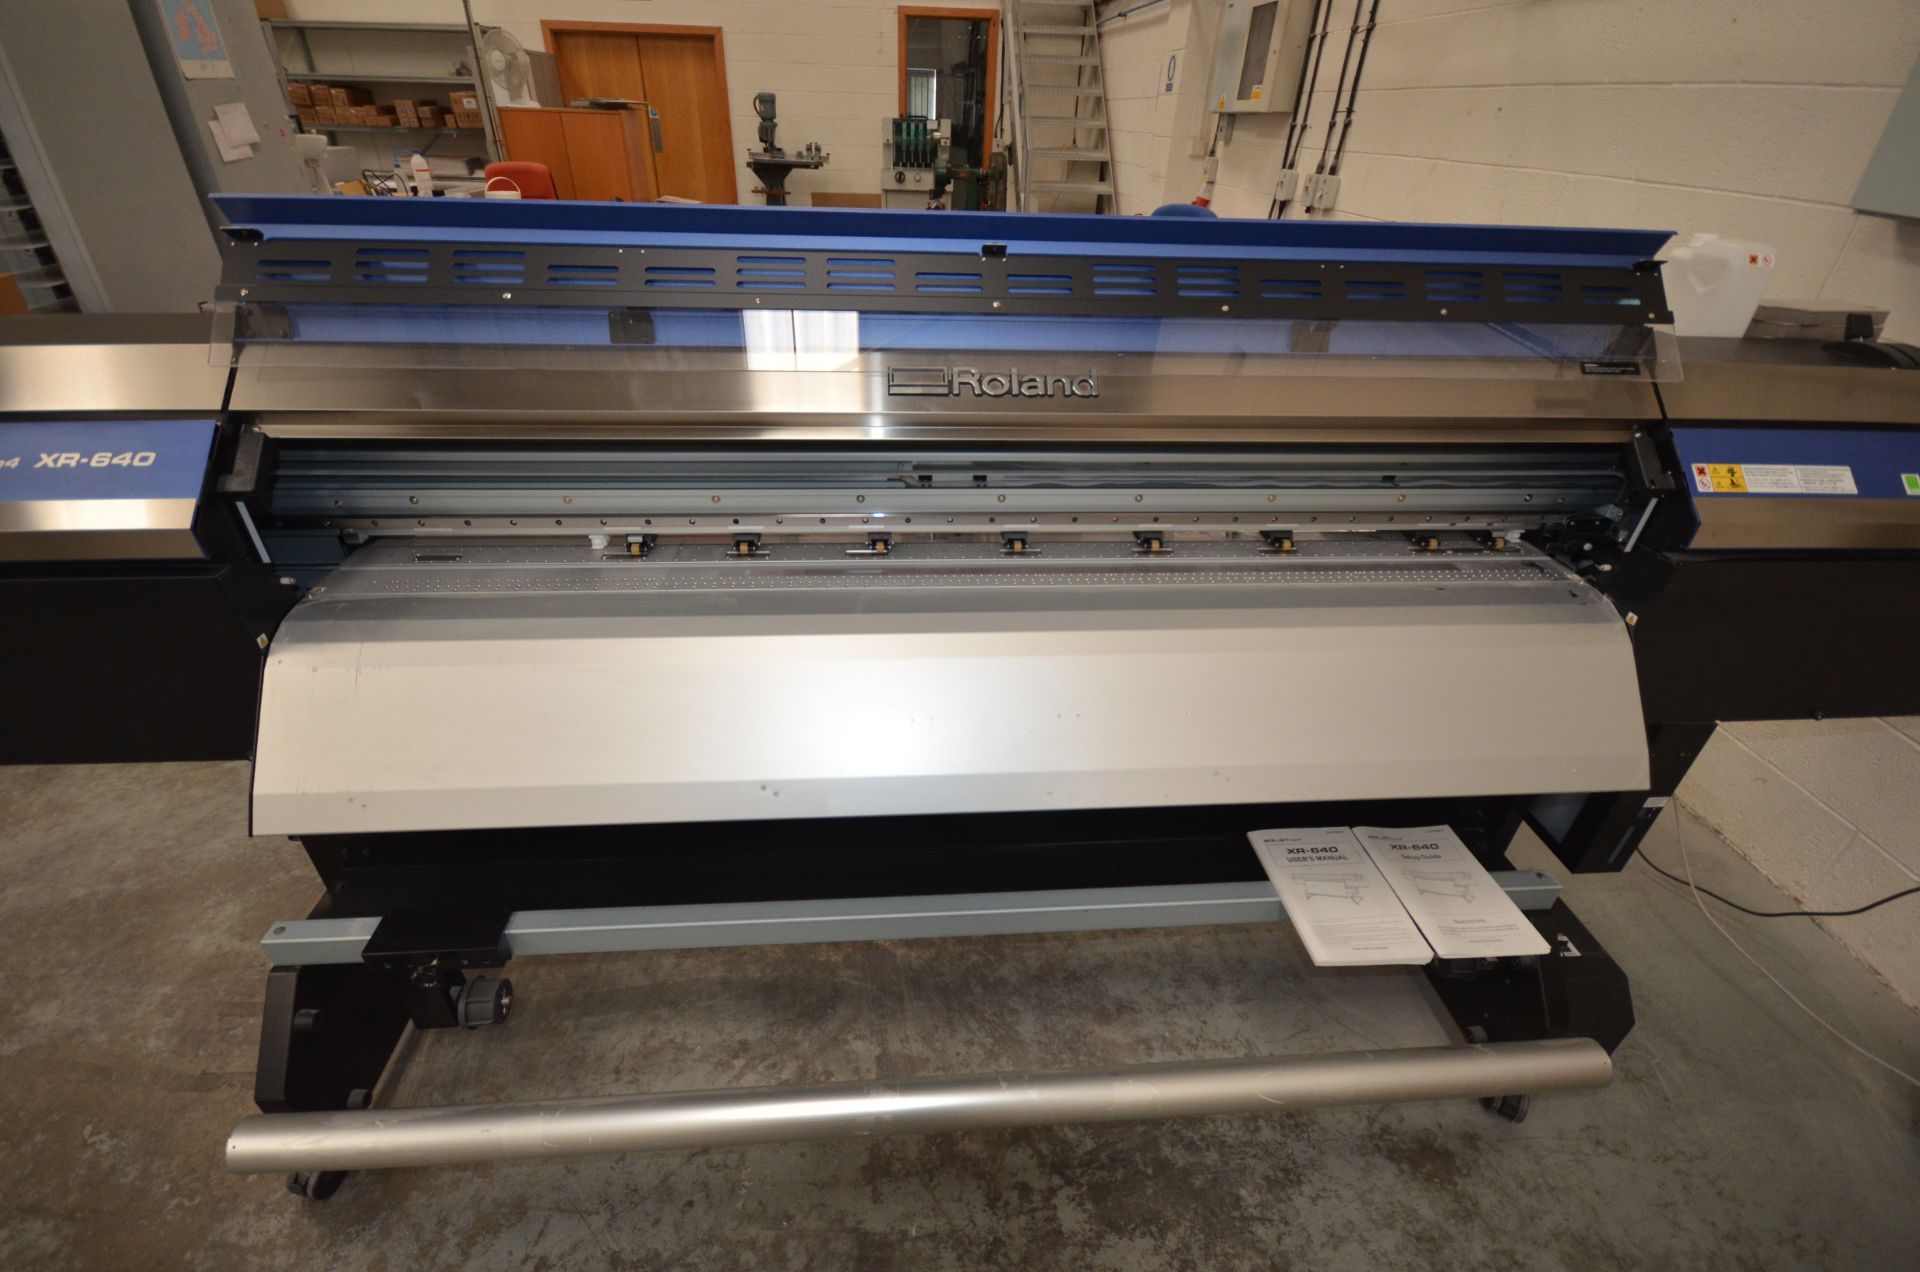 Roland SolJet Pro4 XF-640 Large Format Printer/Cutter serial no ZAX0940 year 2012 - Image 3 of 5